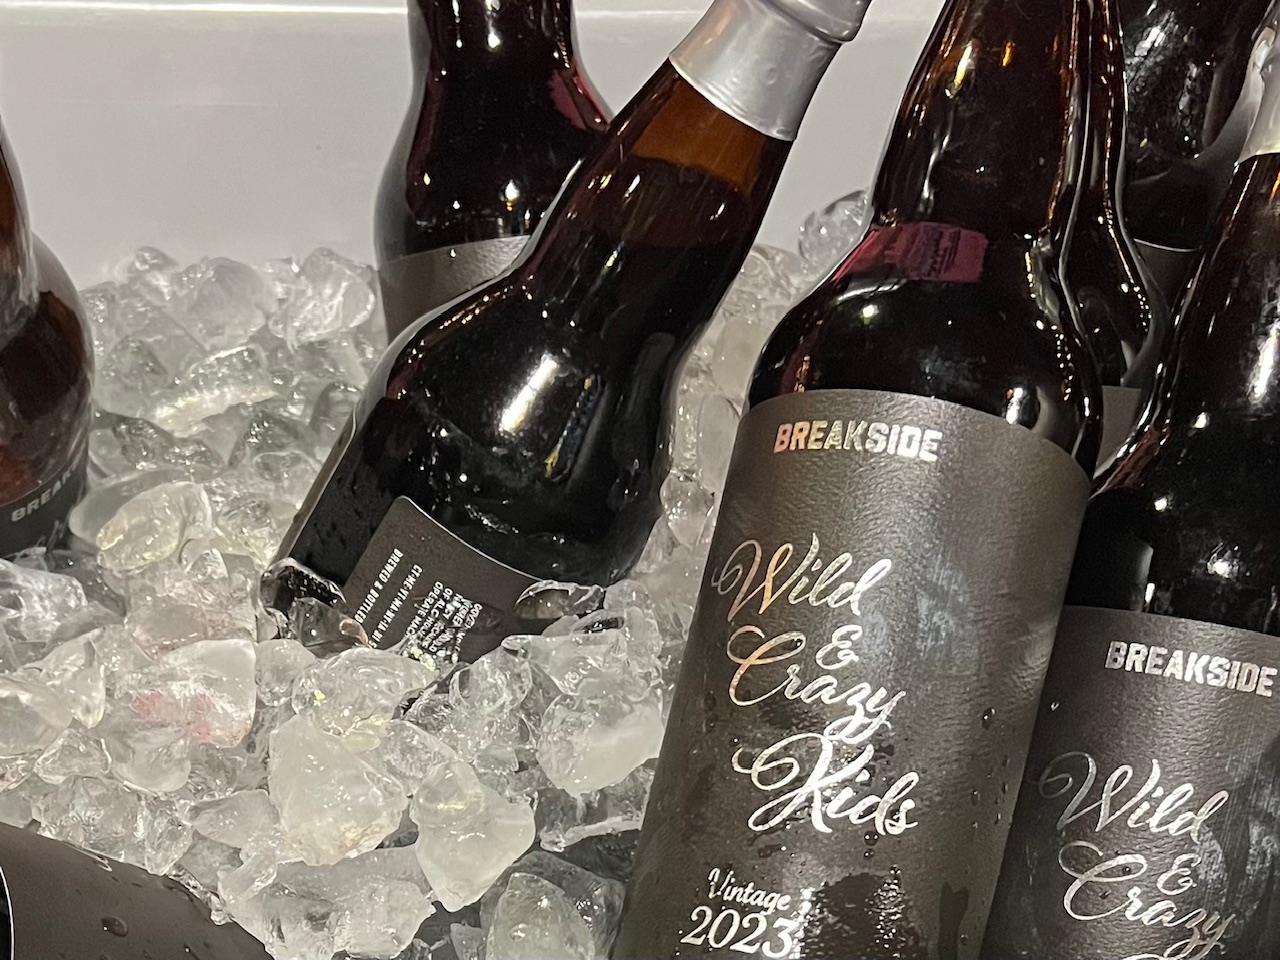 Wild & Crazy Kids from Breakside Brewery was served at the 2023 Festival of Wood and Barrel Aged Beer.